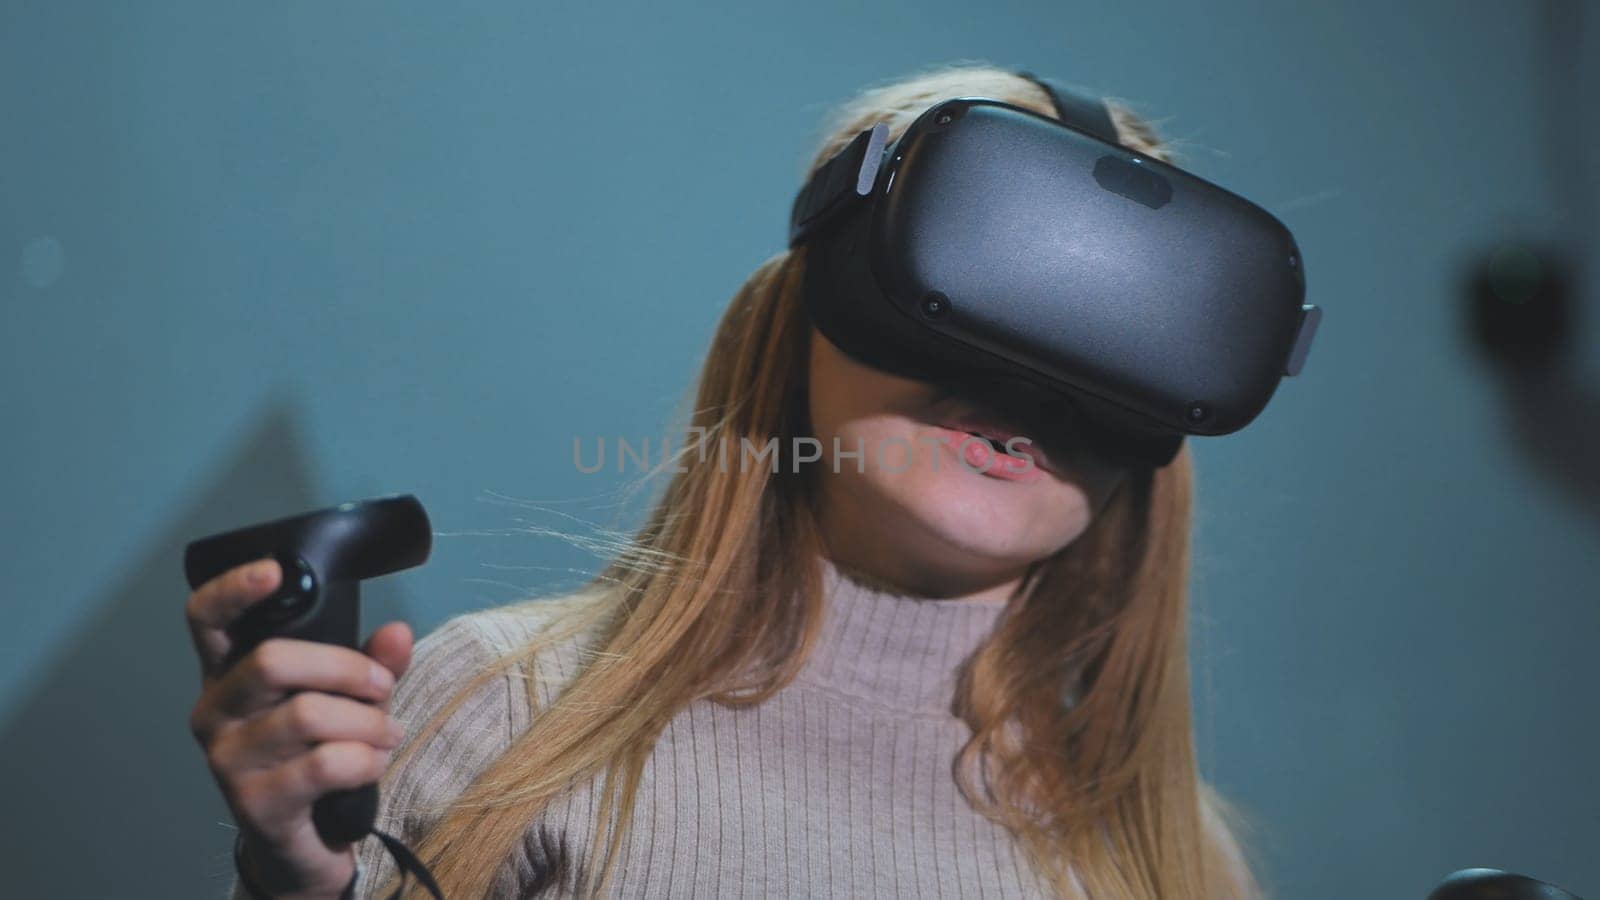 The girl plays virtual reality games in the club. by DovidPro